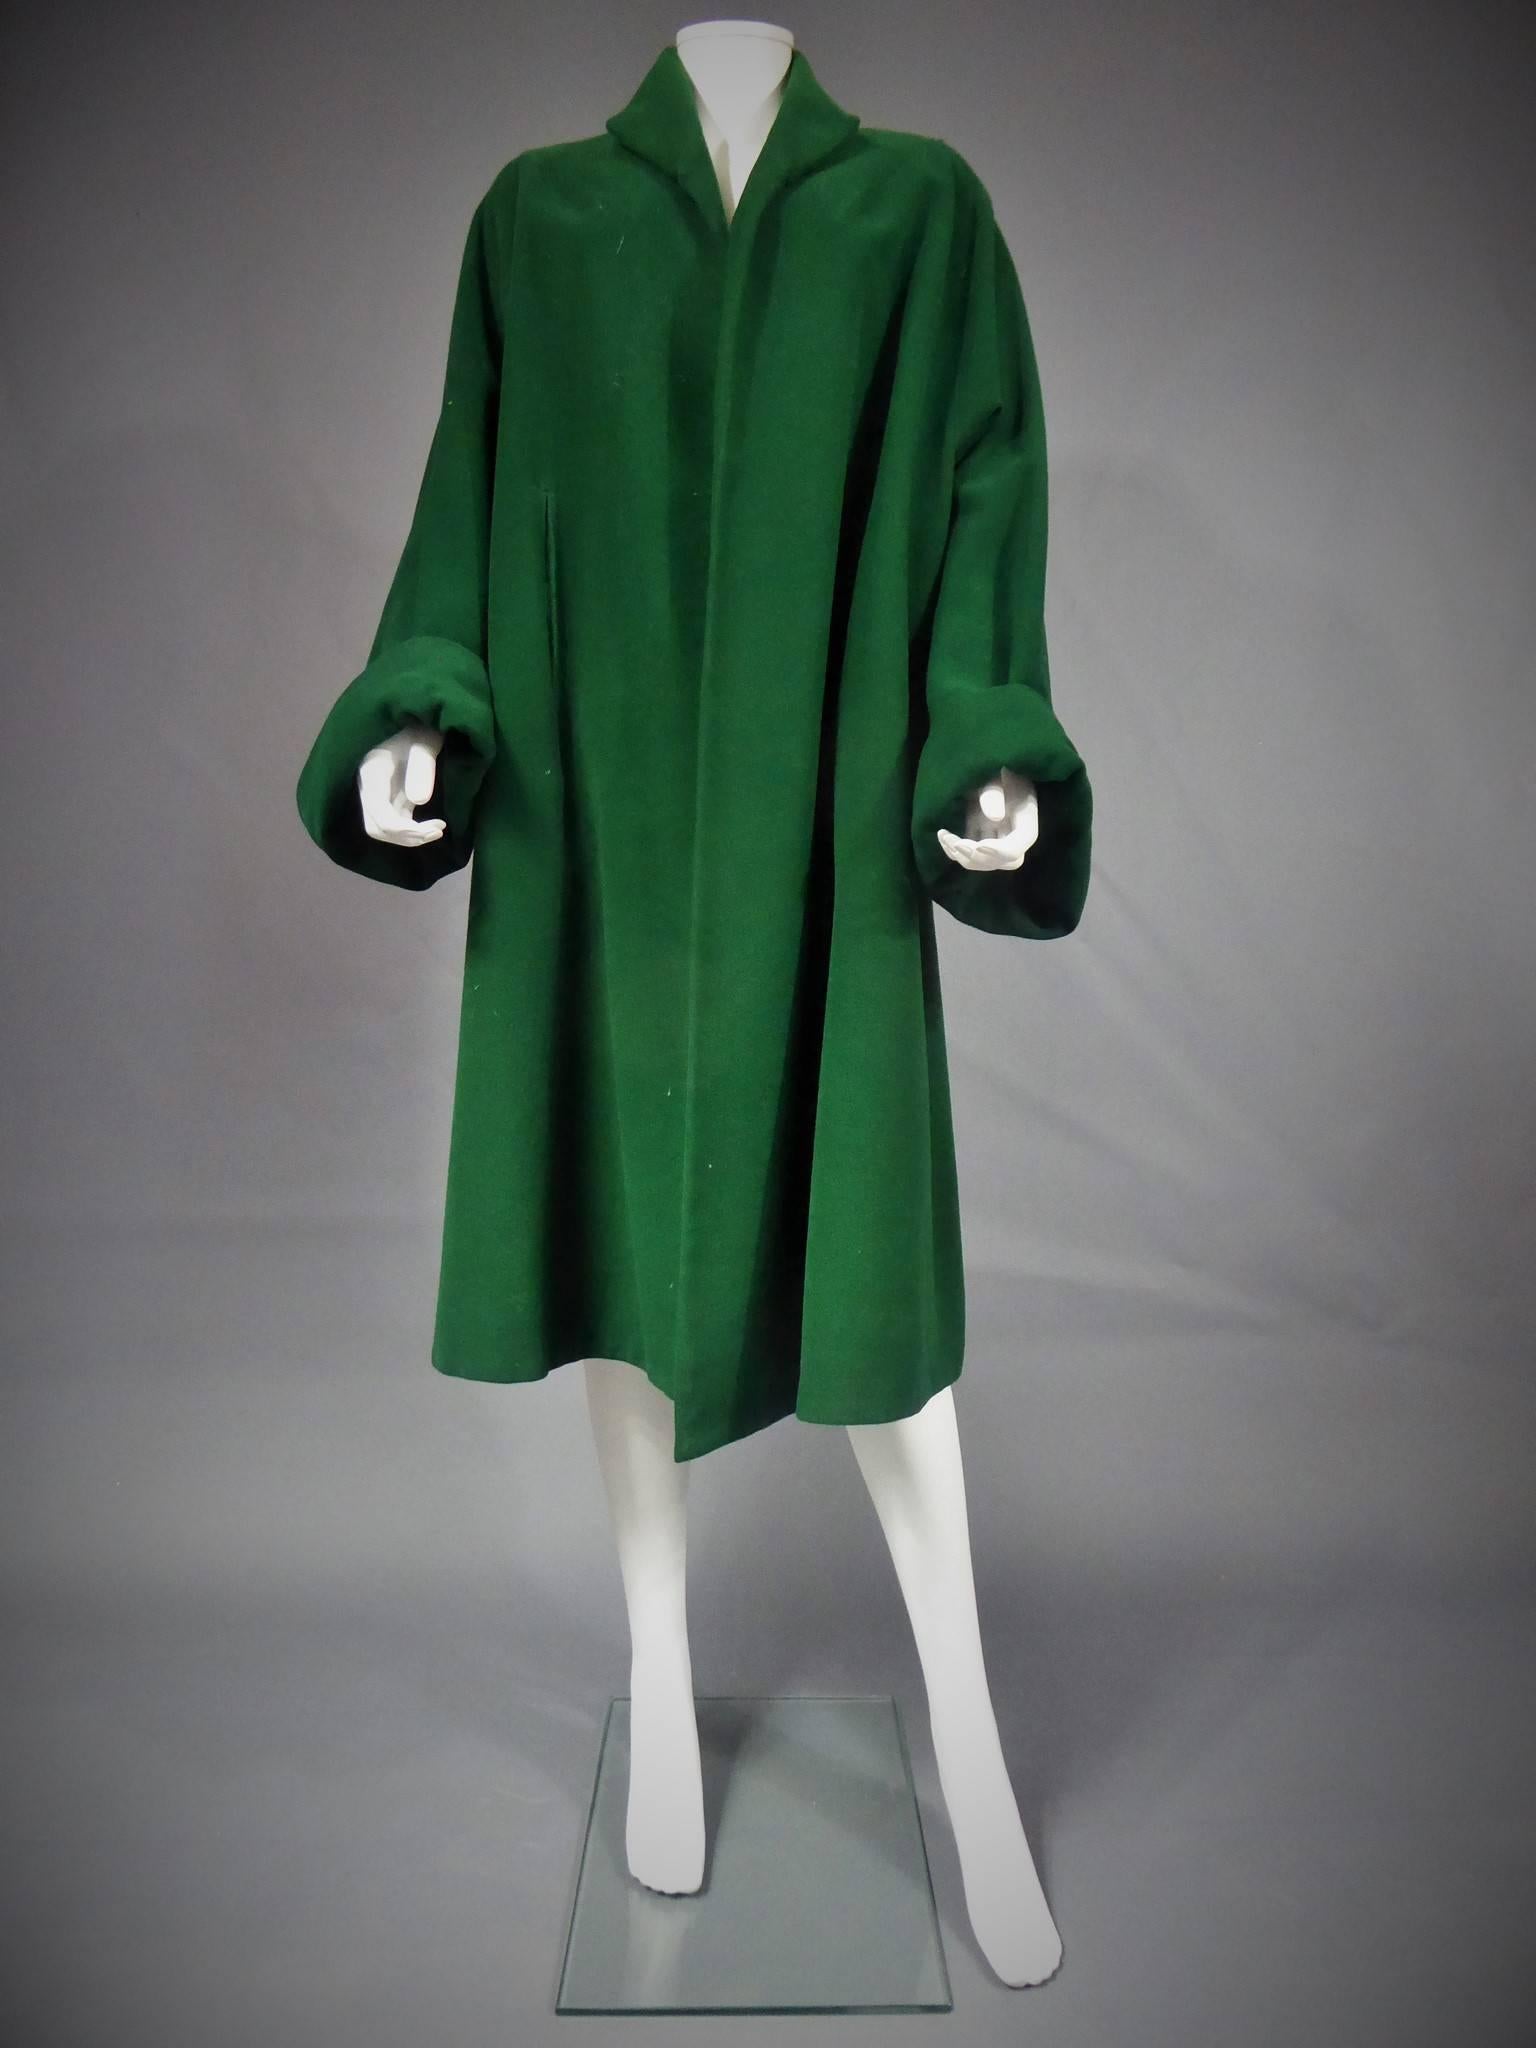 Black Bruyère Haute Couture Numbered 20650 - Circa 1955-1960